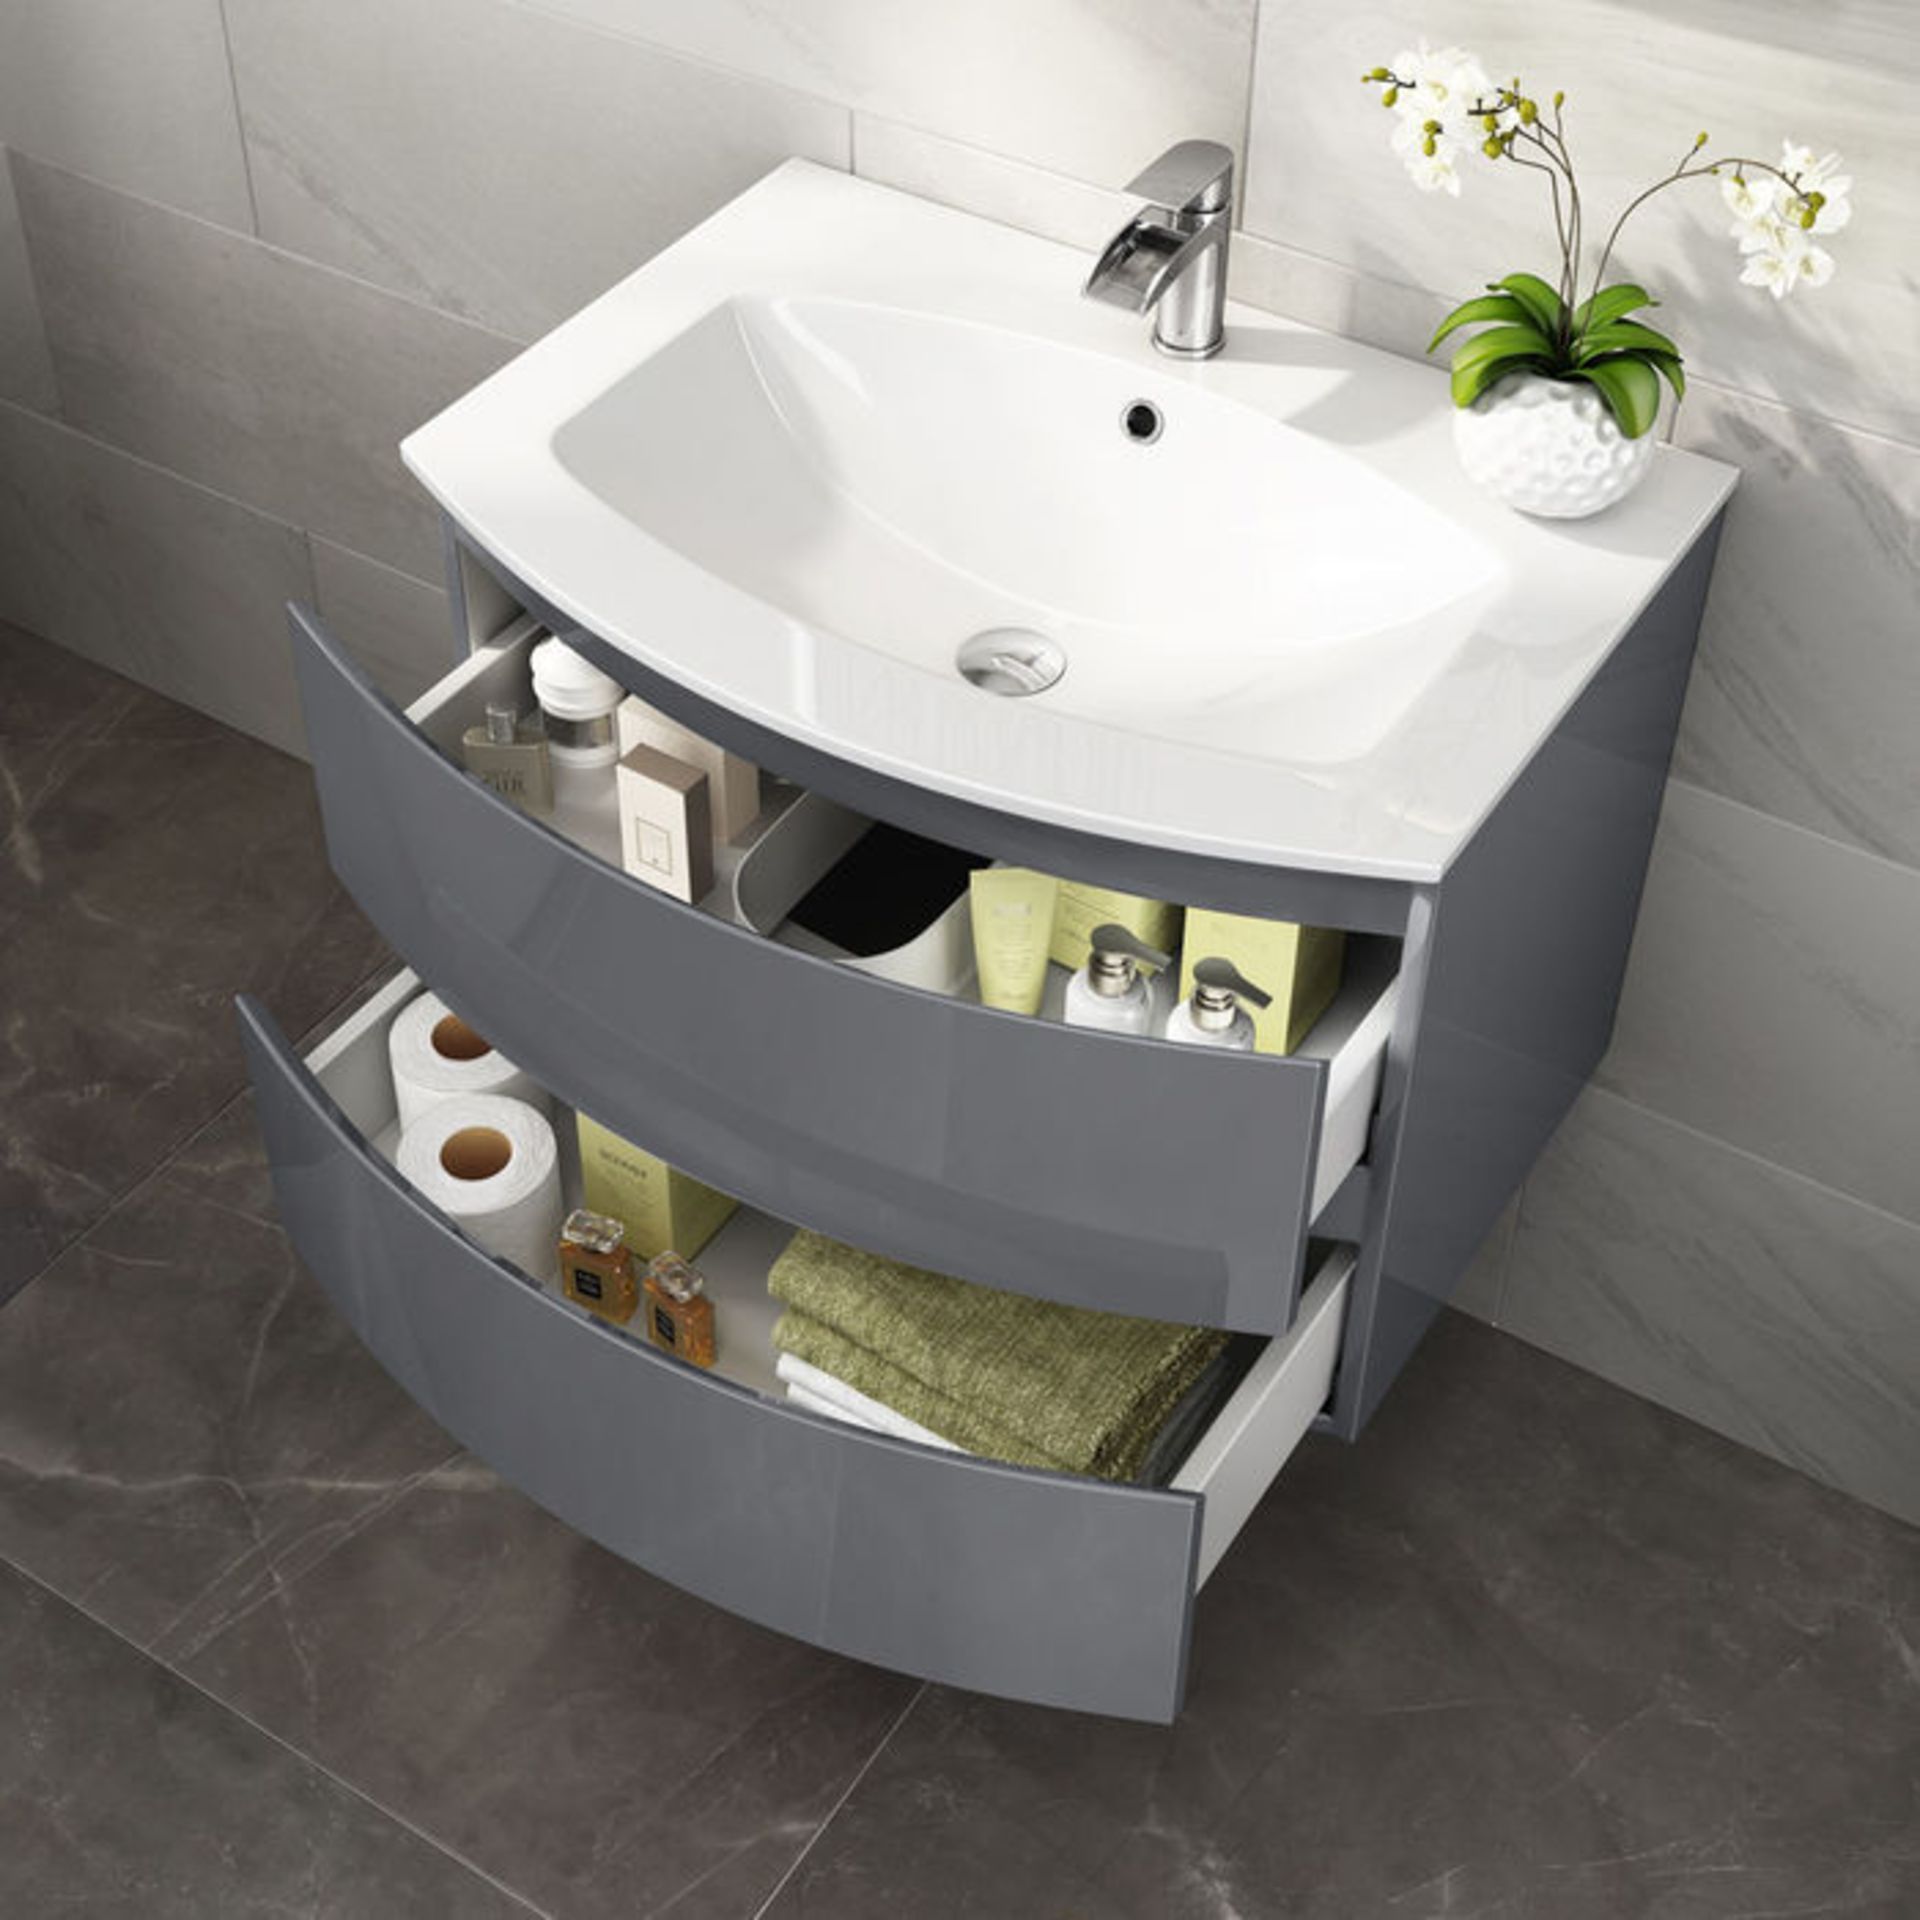 New & Boxed 700mm Amelie Gloss Grey Curved Vanity Unit - Wall Hung. RRP £999.99. Comes C... - Image 2 of 3